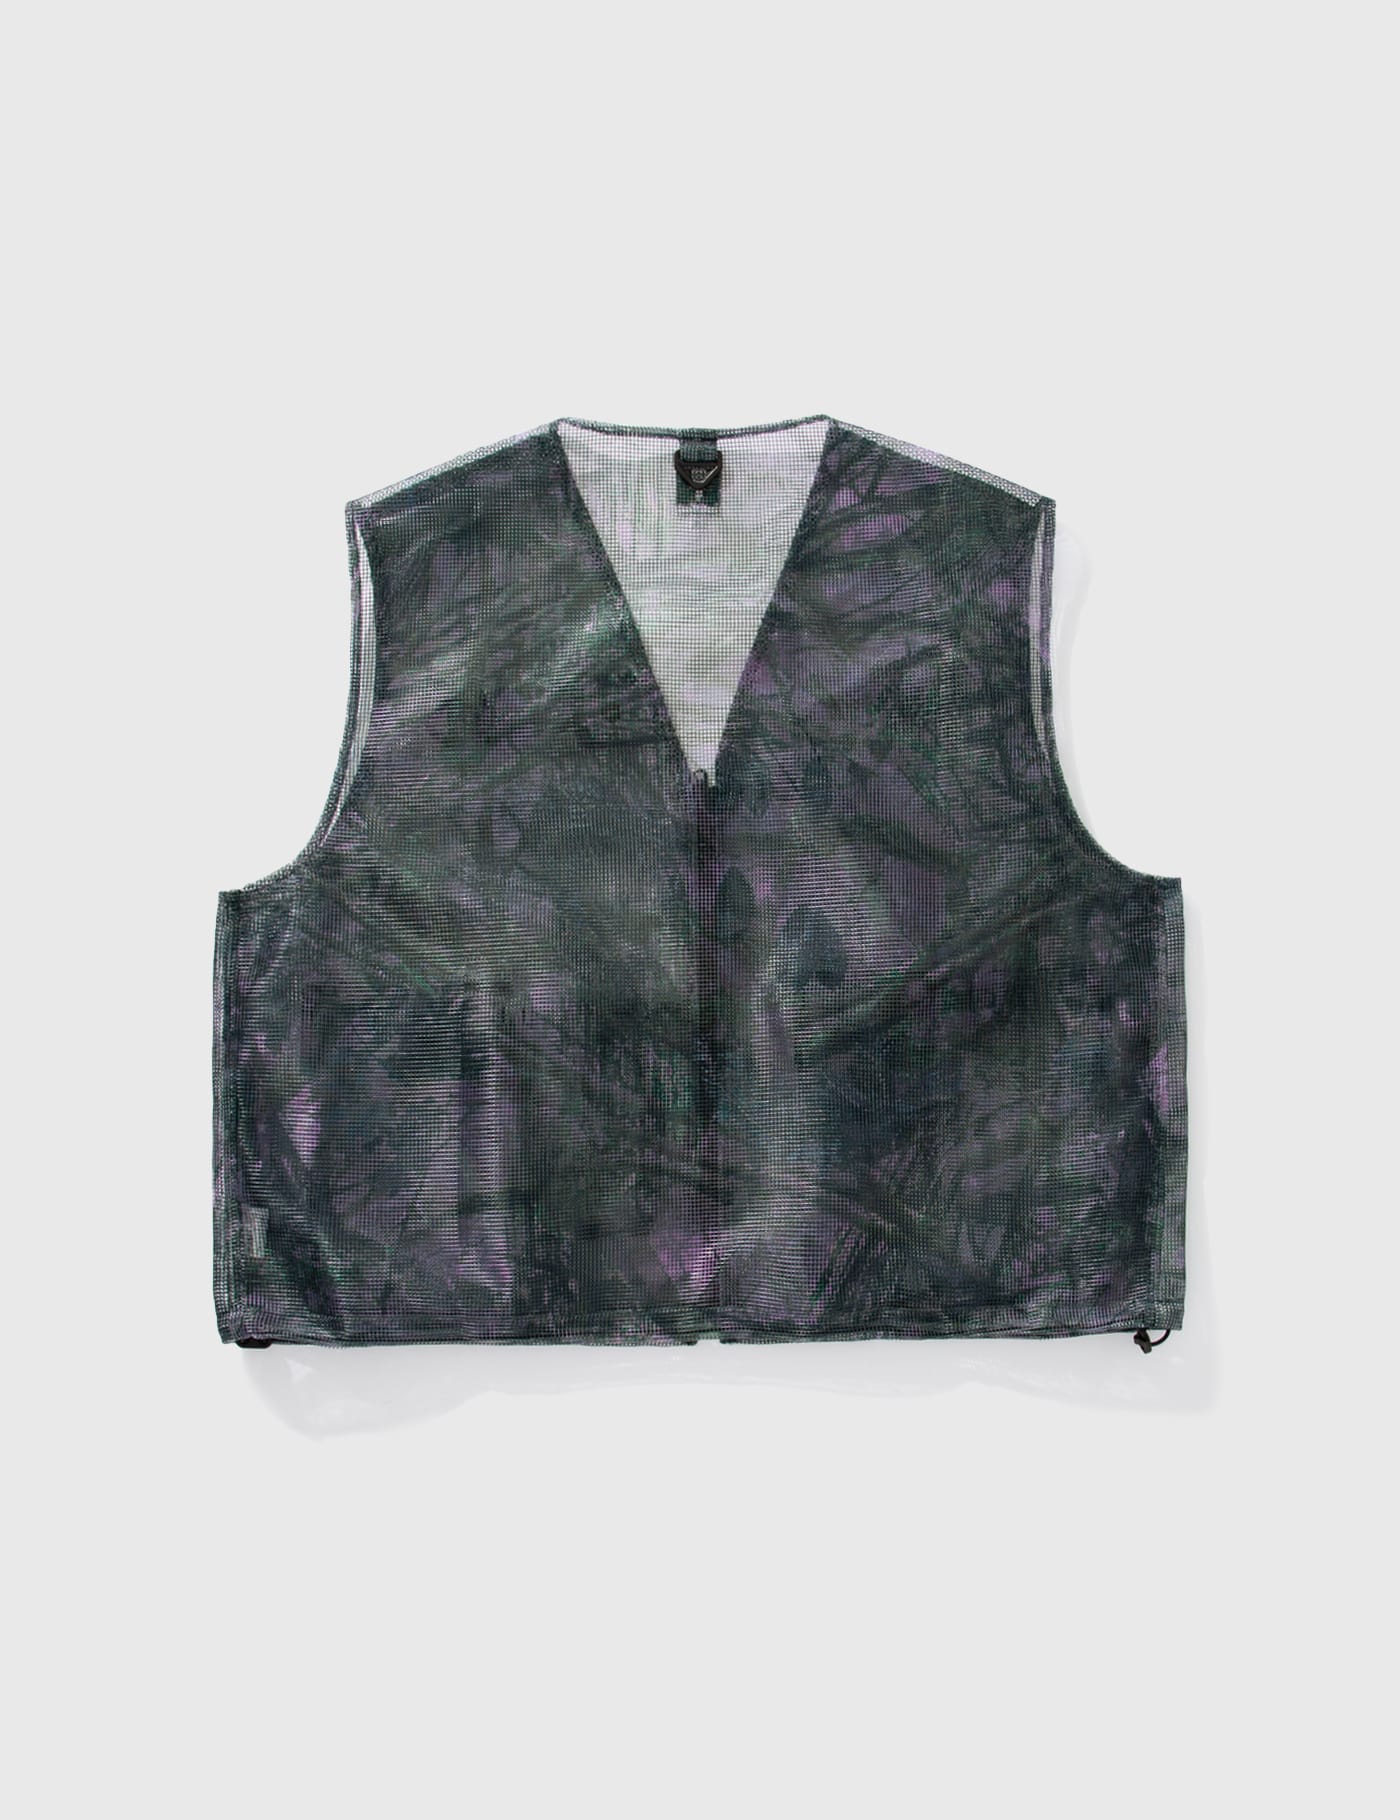 South2 West8 - Bush Trek Vest | HBX - Globally Curated Fashion and